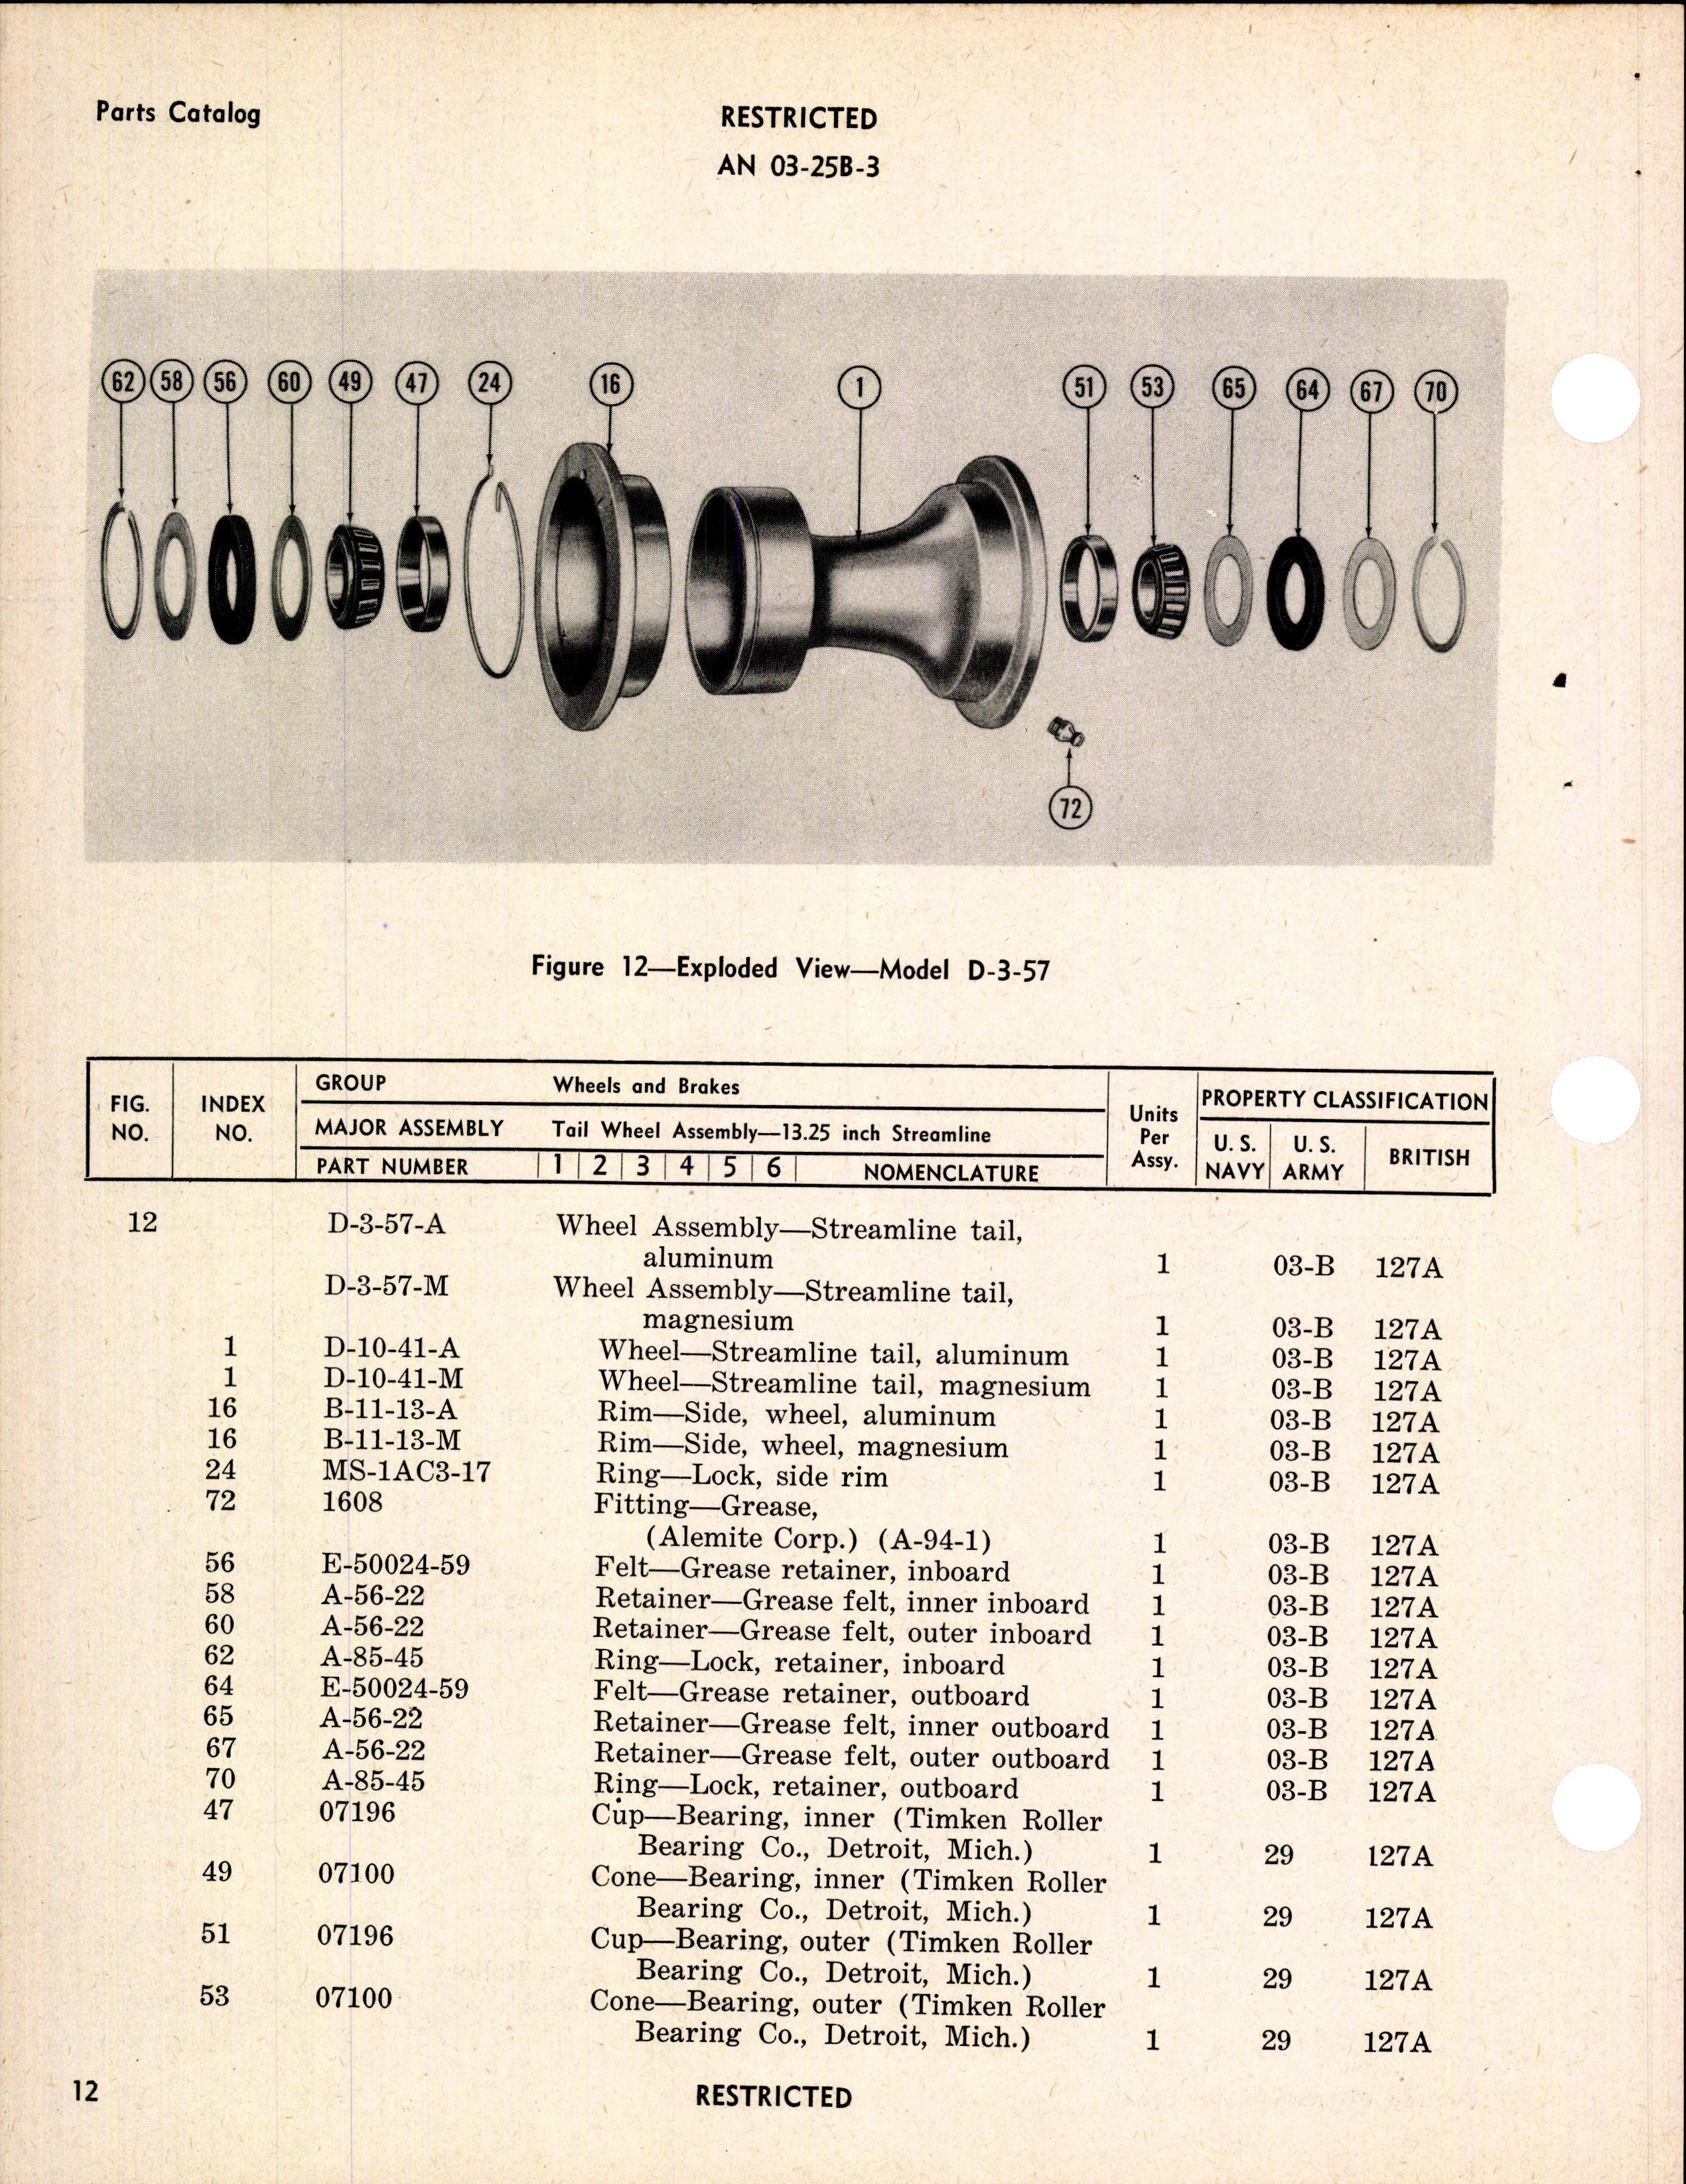 Sample page 6 from AirCorps Library document: Handbook of Instructions with Parts Catalog for Nose and Tail Wheels